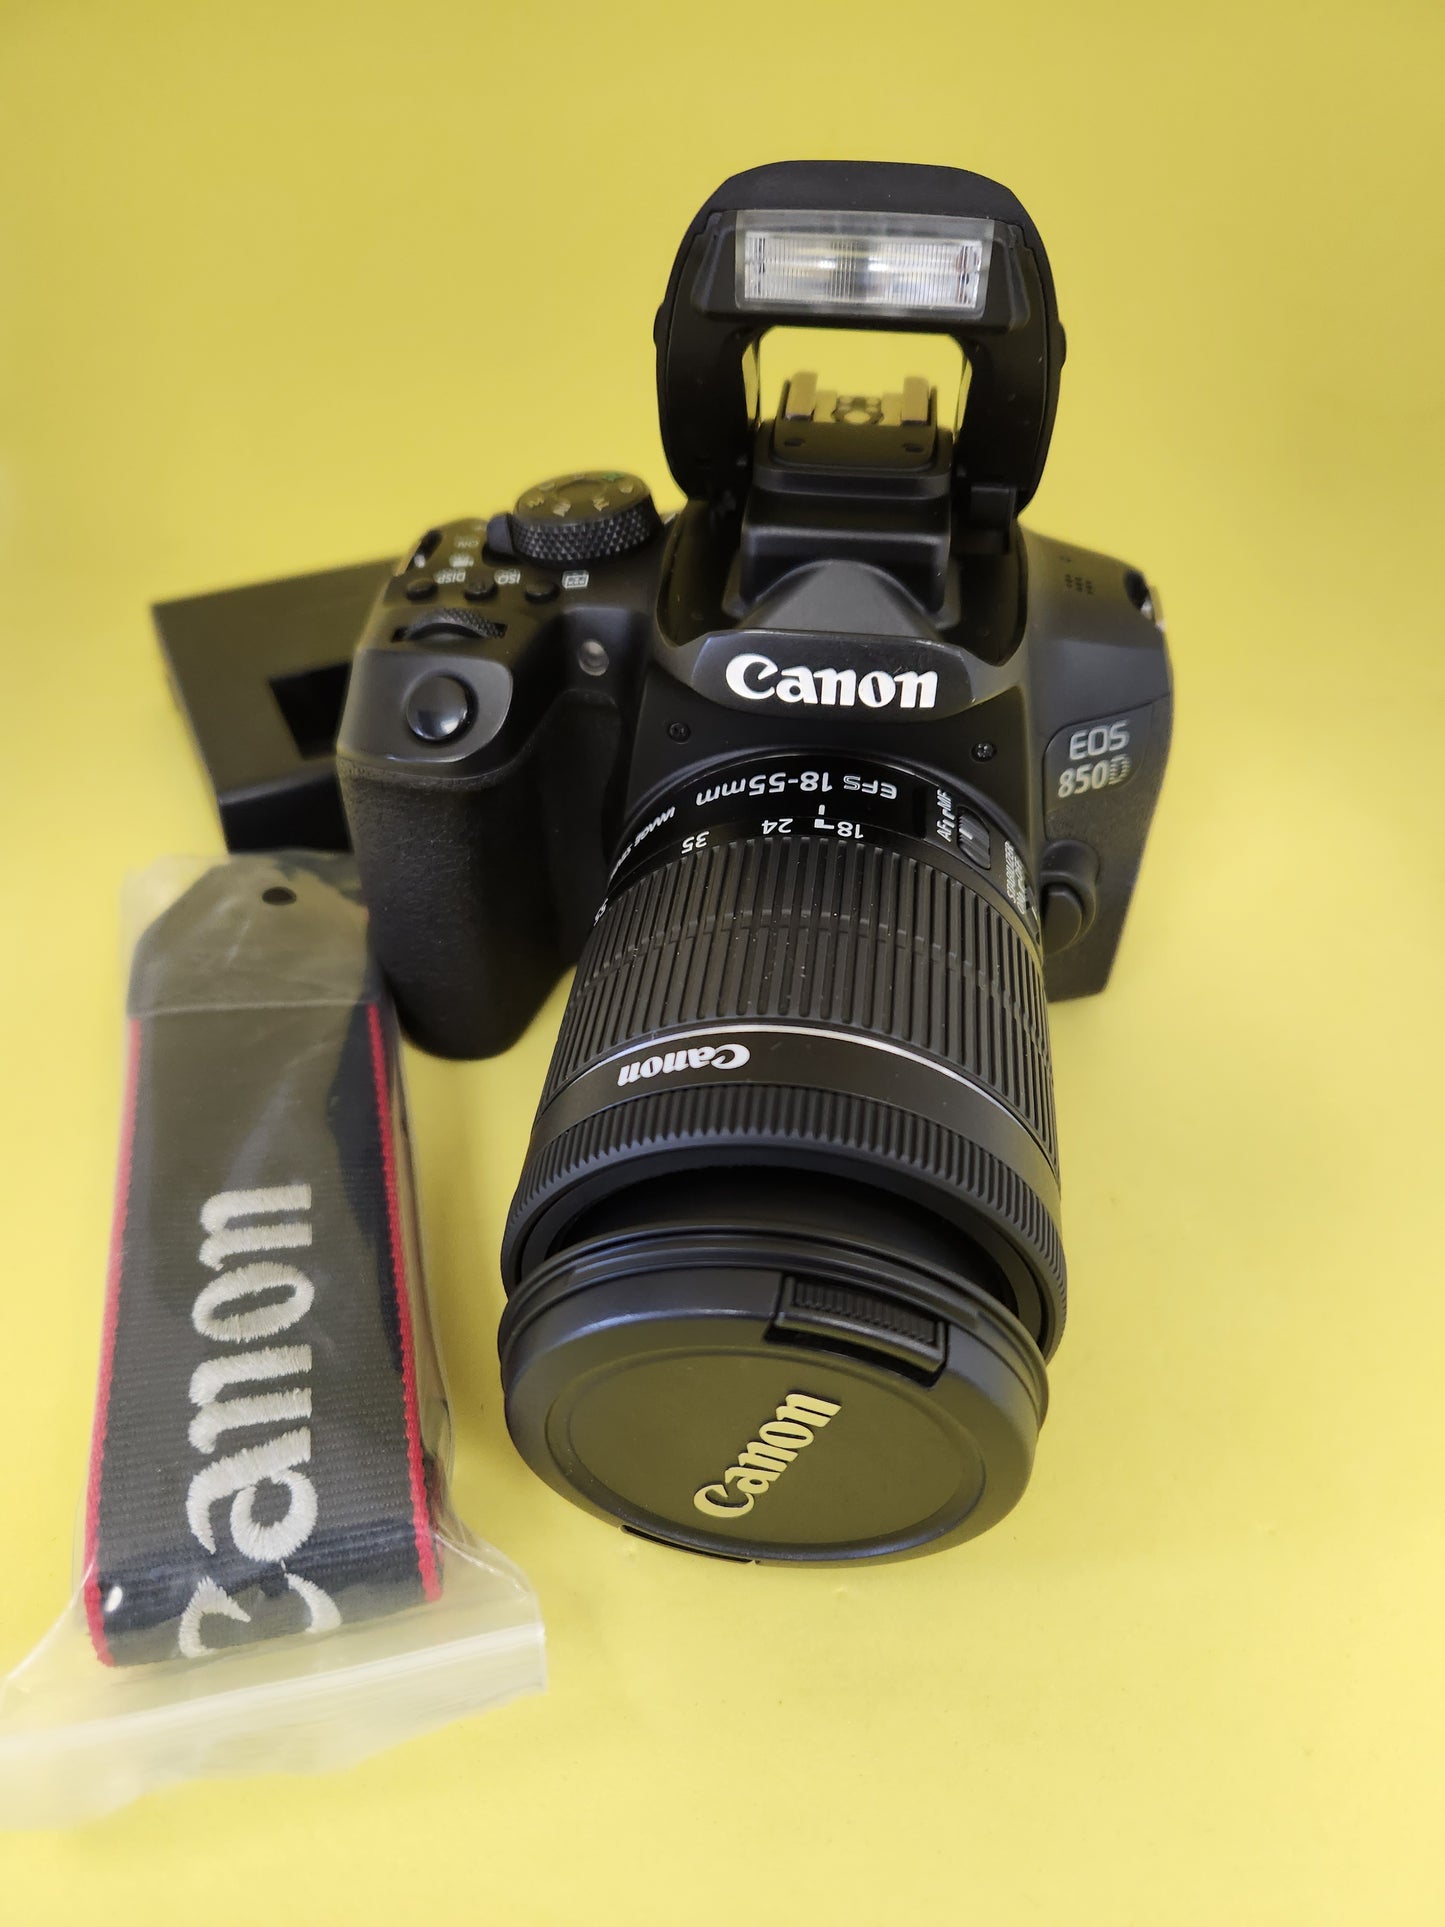 Canon EOS 850D with lens 18-55mm used